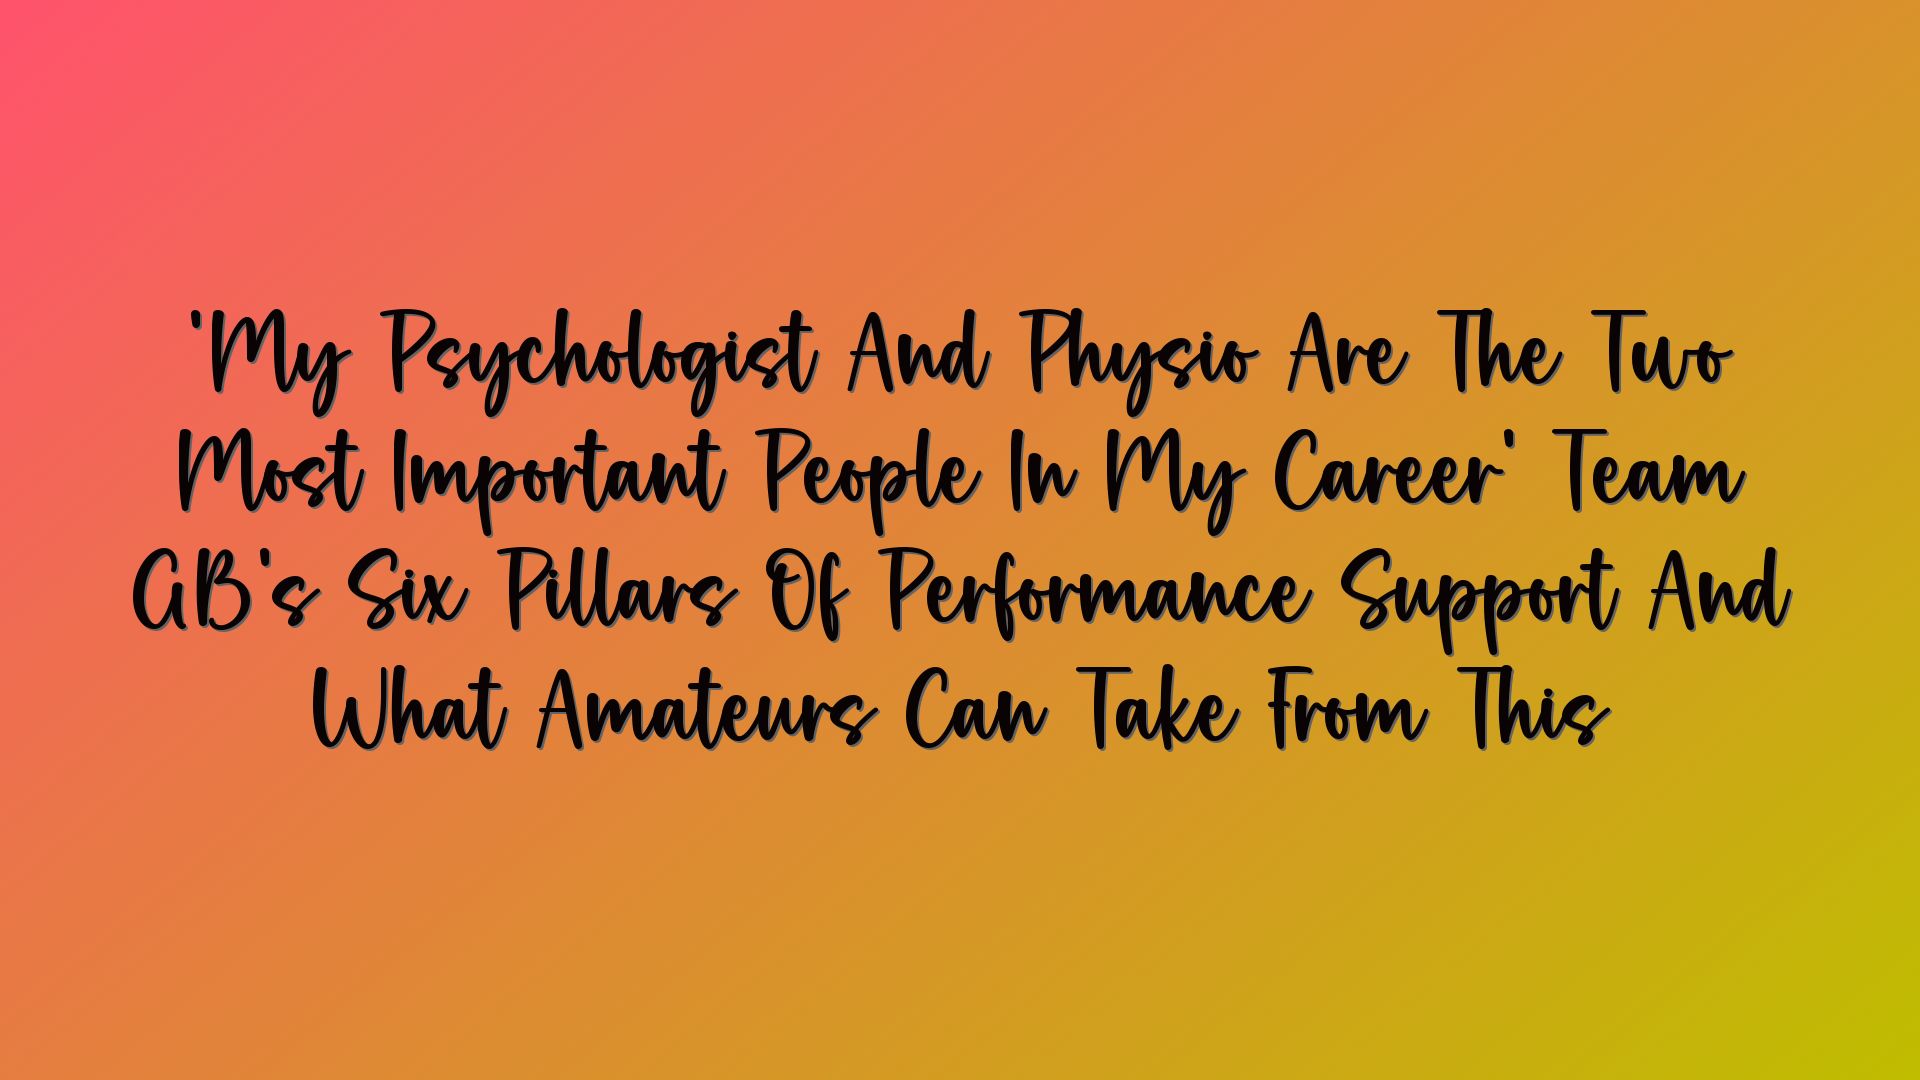 ‘My Psychologist And Physio Are The Two Most Important People In My Career’ Team GB’s Six Pillars Of Performance Support And What Amateurs Can Take From This